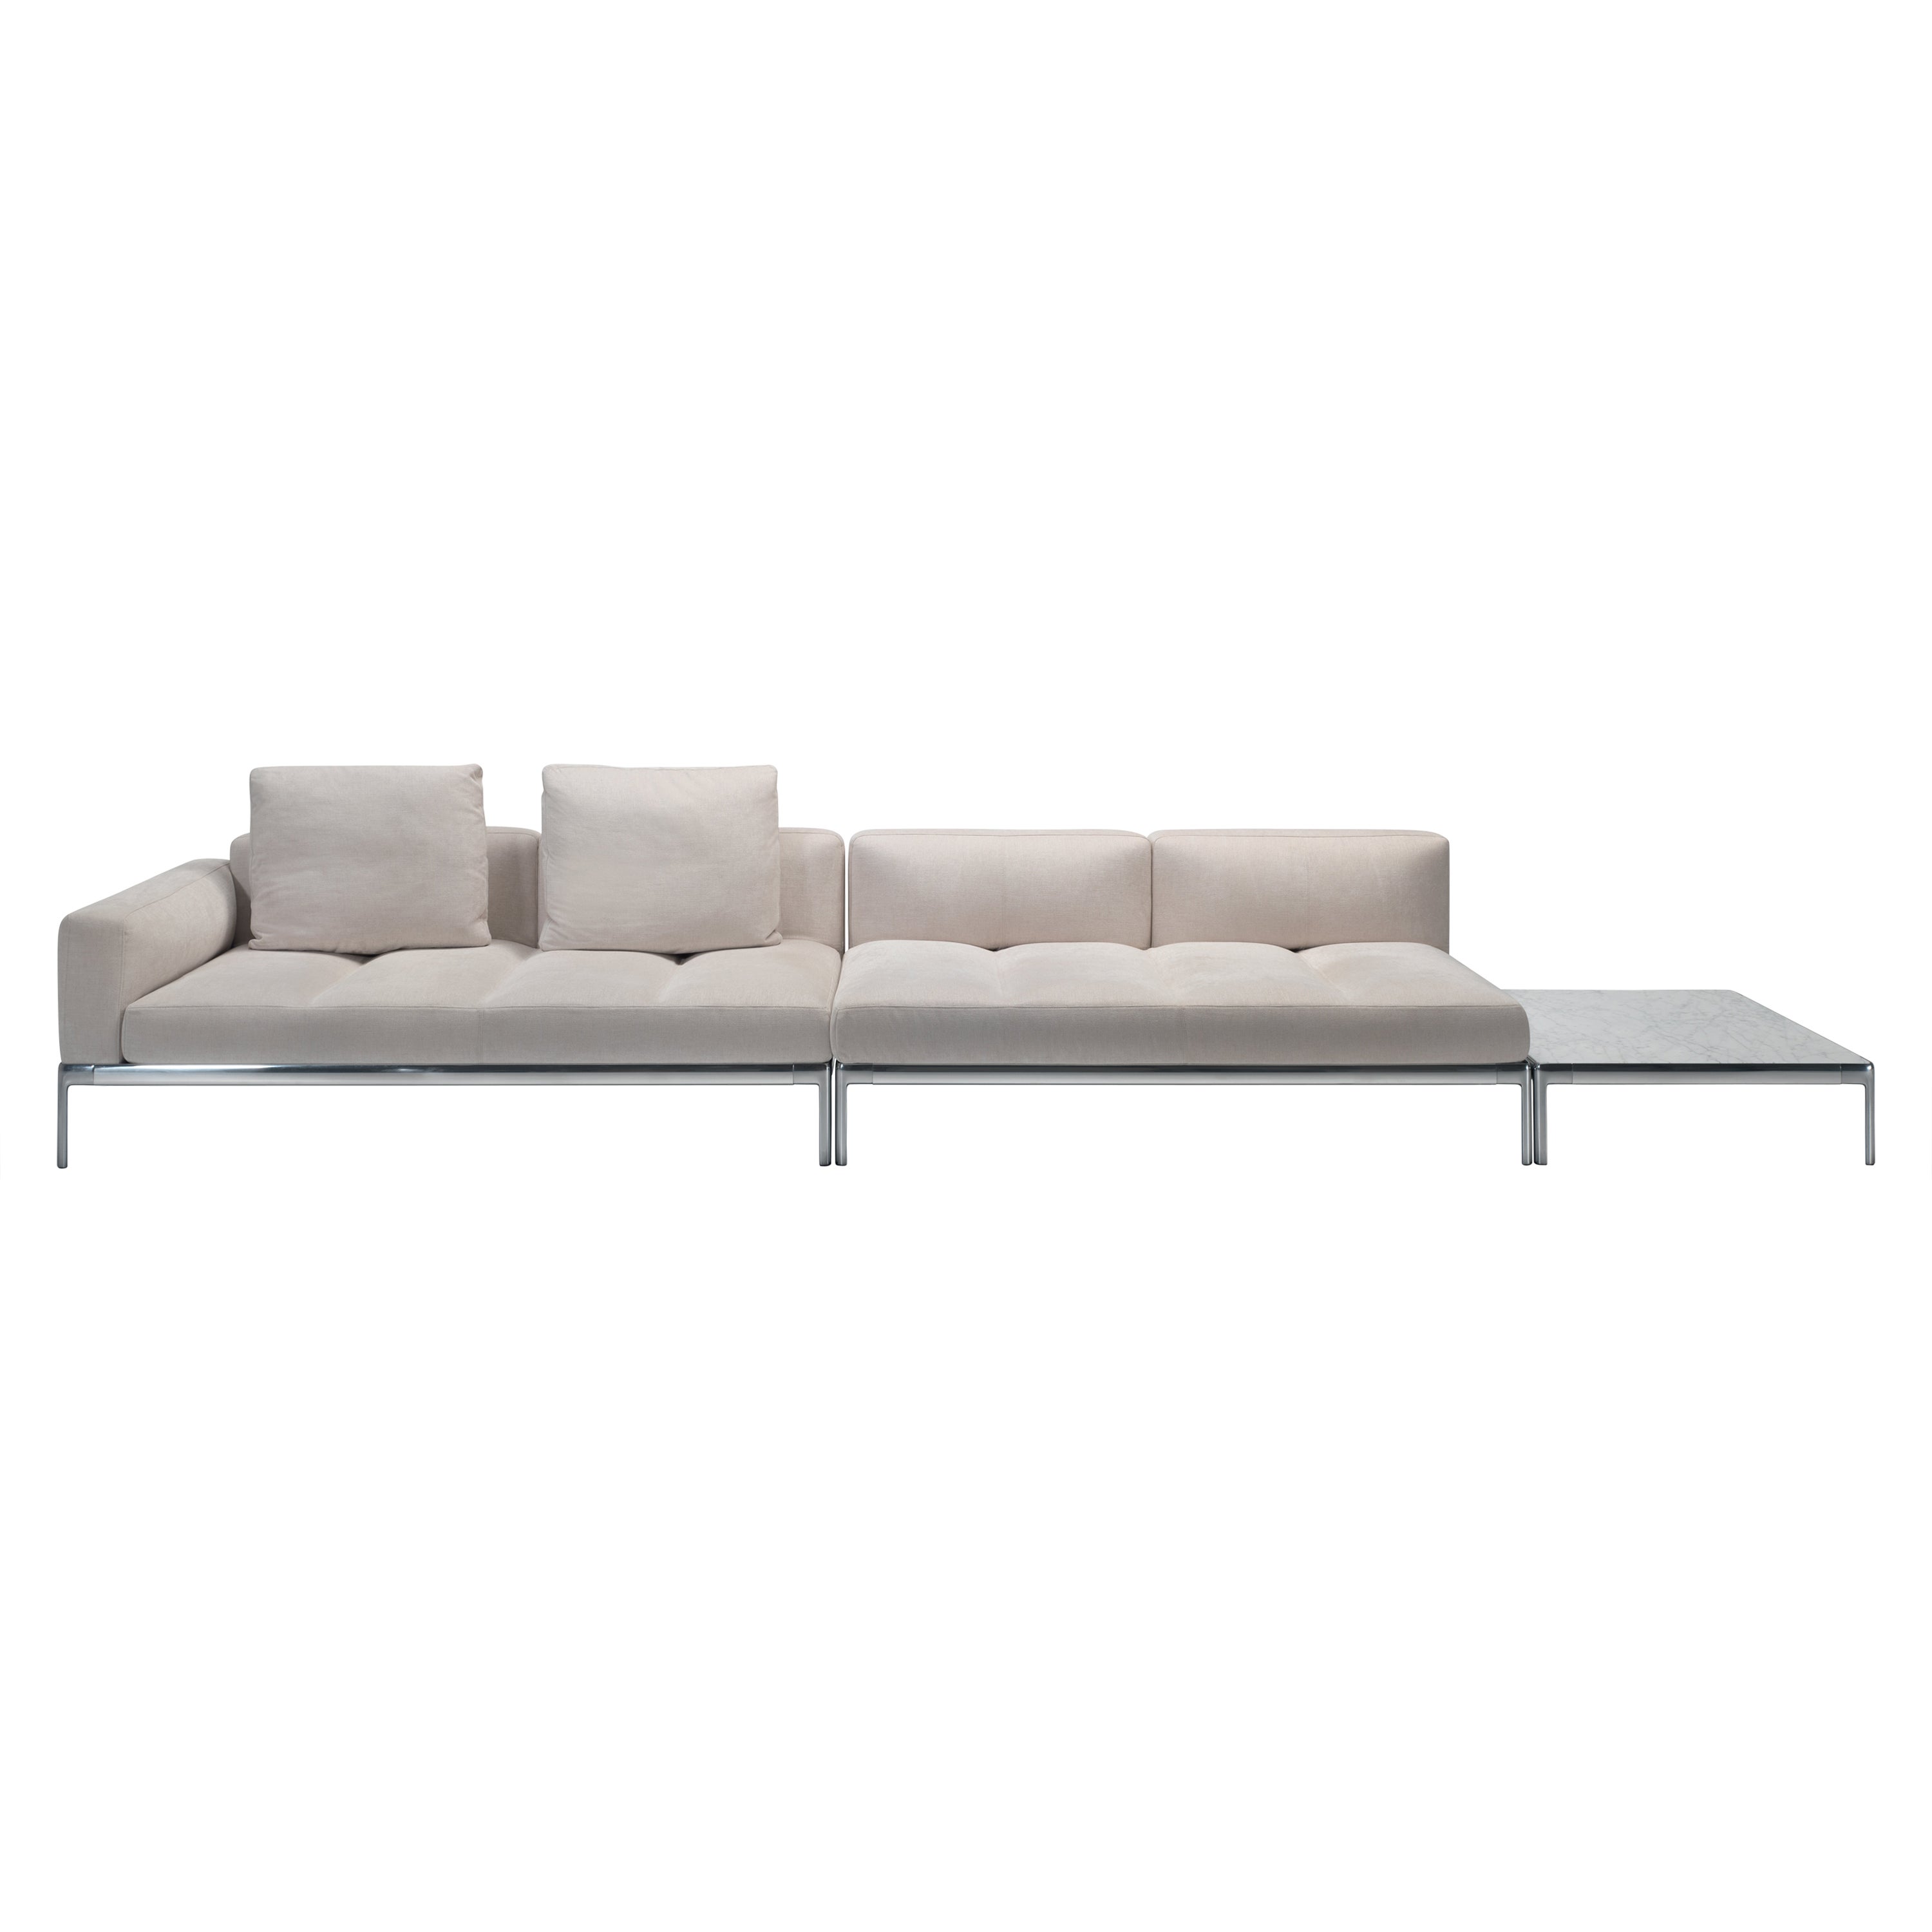 Alias AluZen Modular Sofa & Low Table in Upholstery with Polished Aluminum Frame